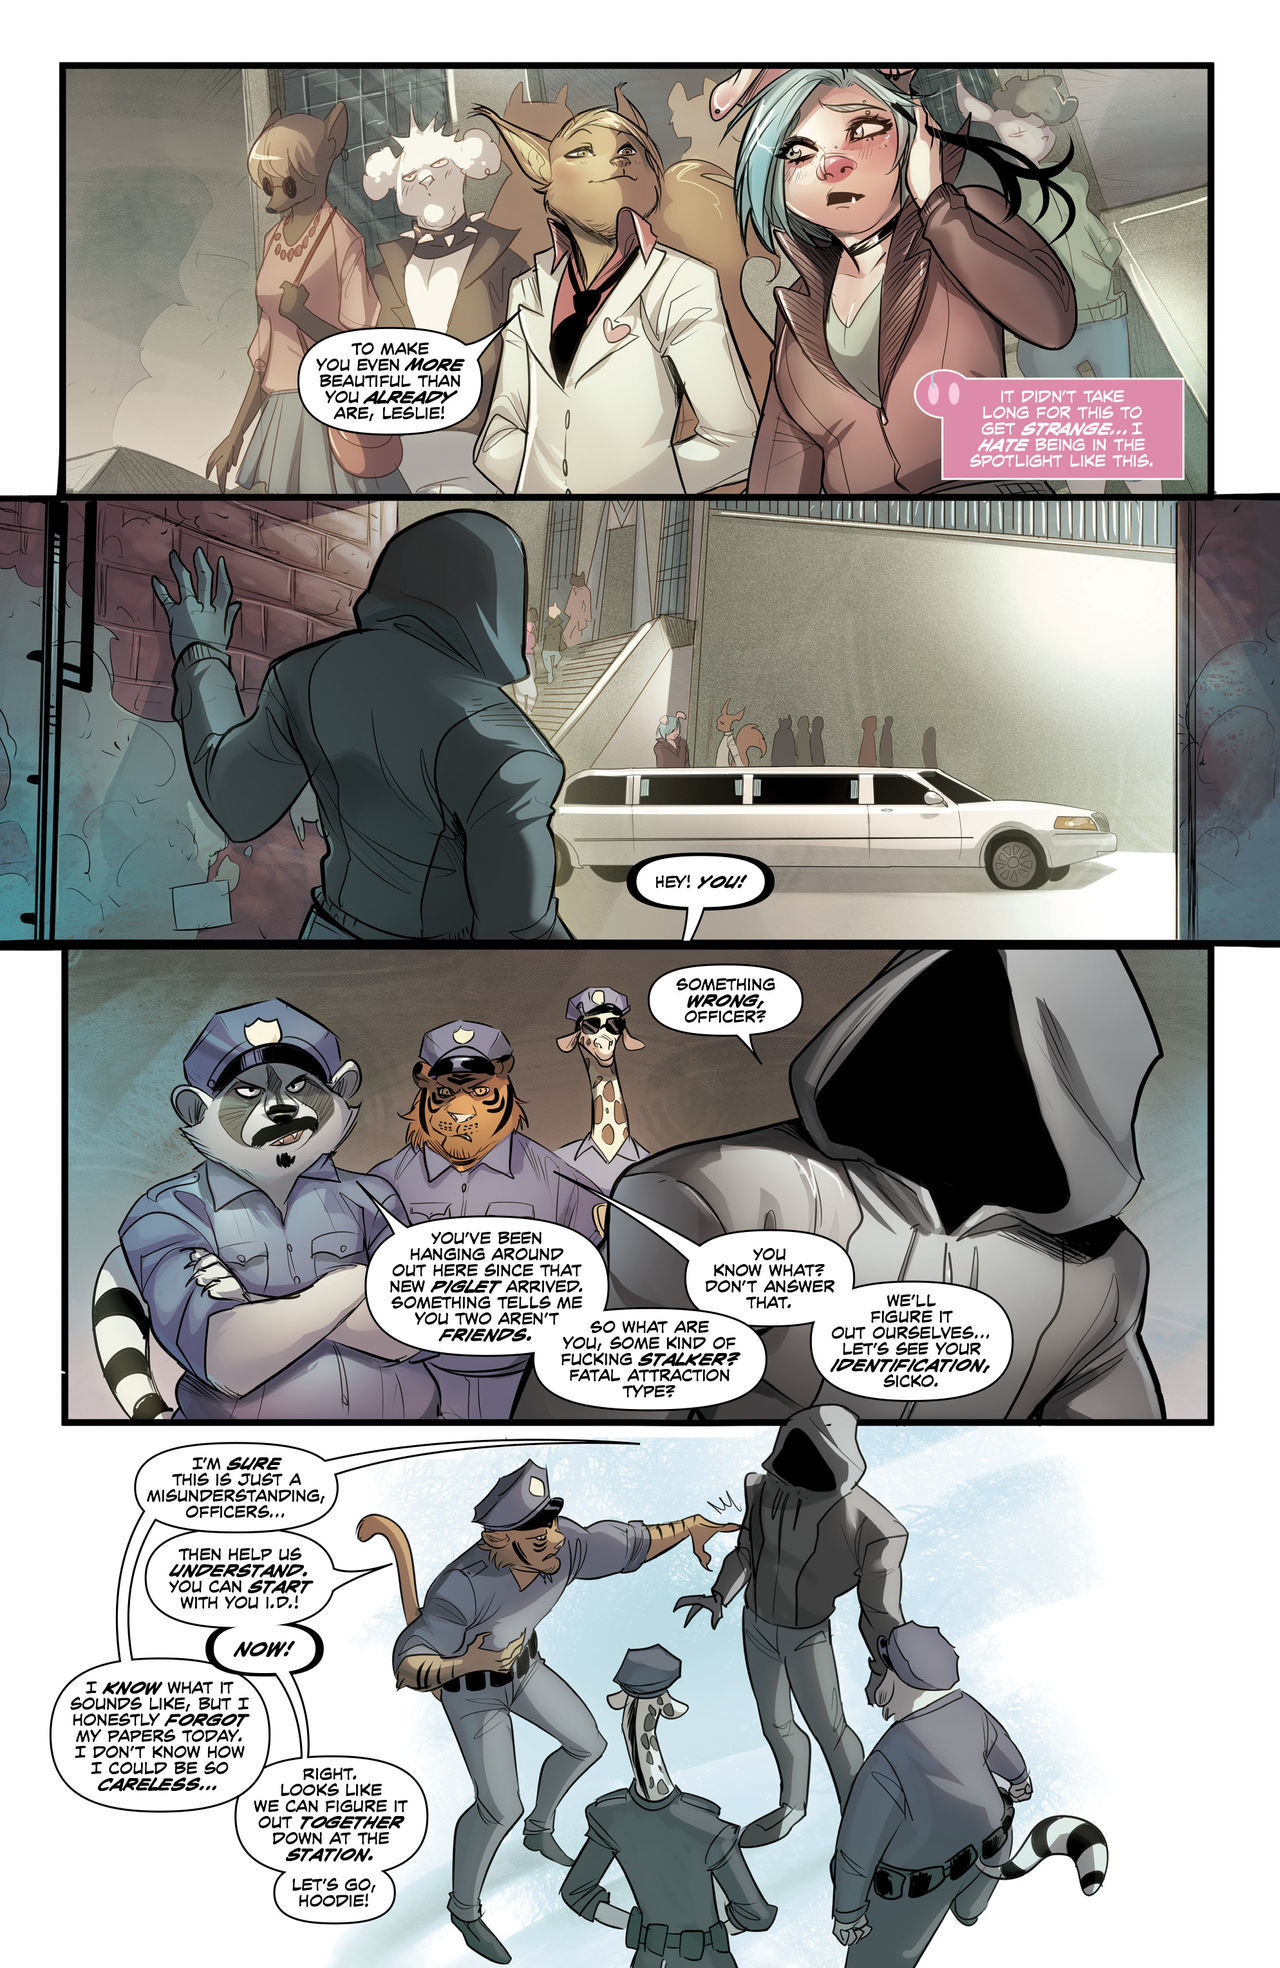 Unnatural Issue 2 by Mirka Andolfo page 21